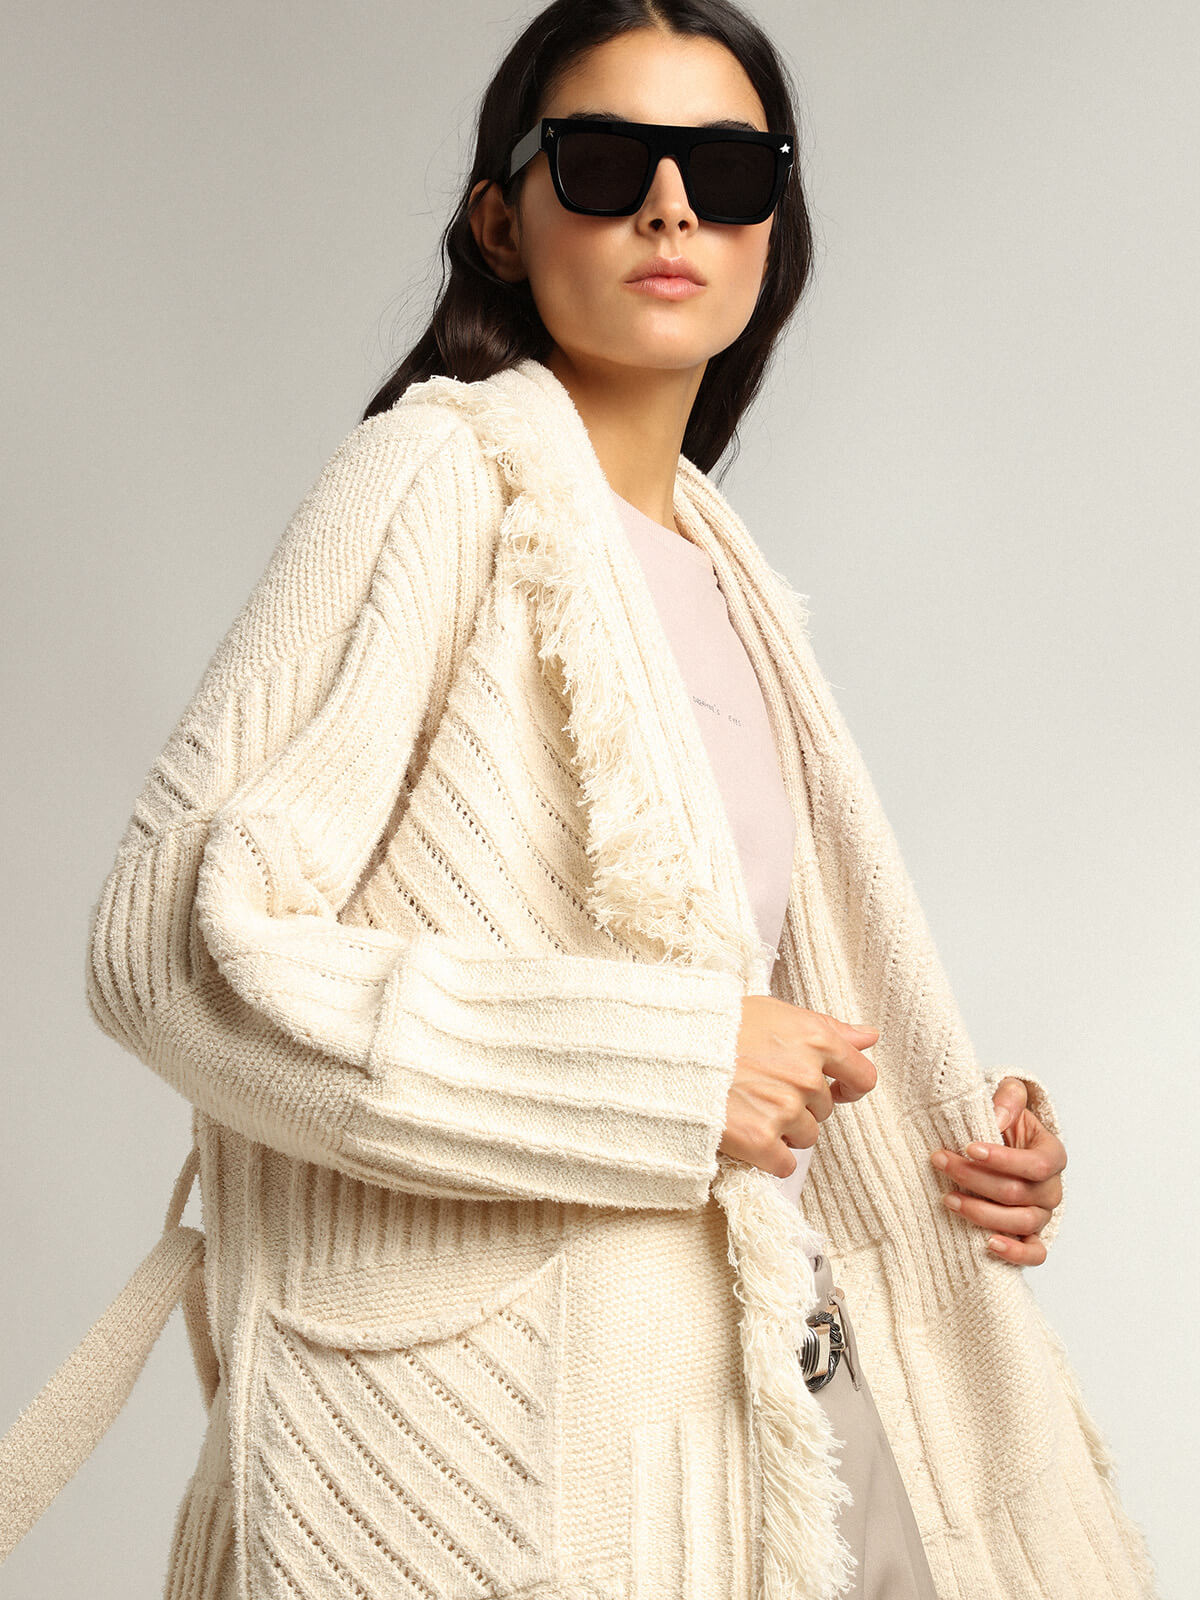 Golden Goose Journey Ws Knit Belted Cardigan in Papyrus available at TNT The New Trend Australia.